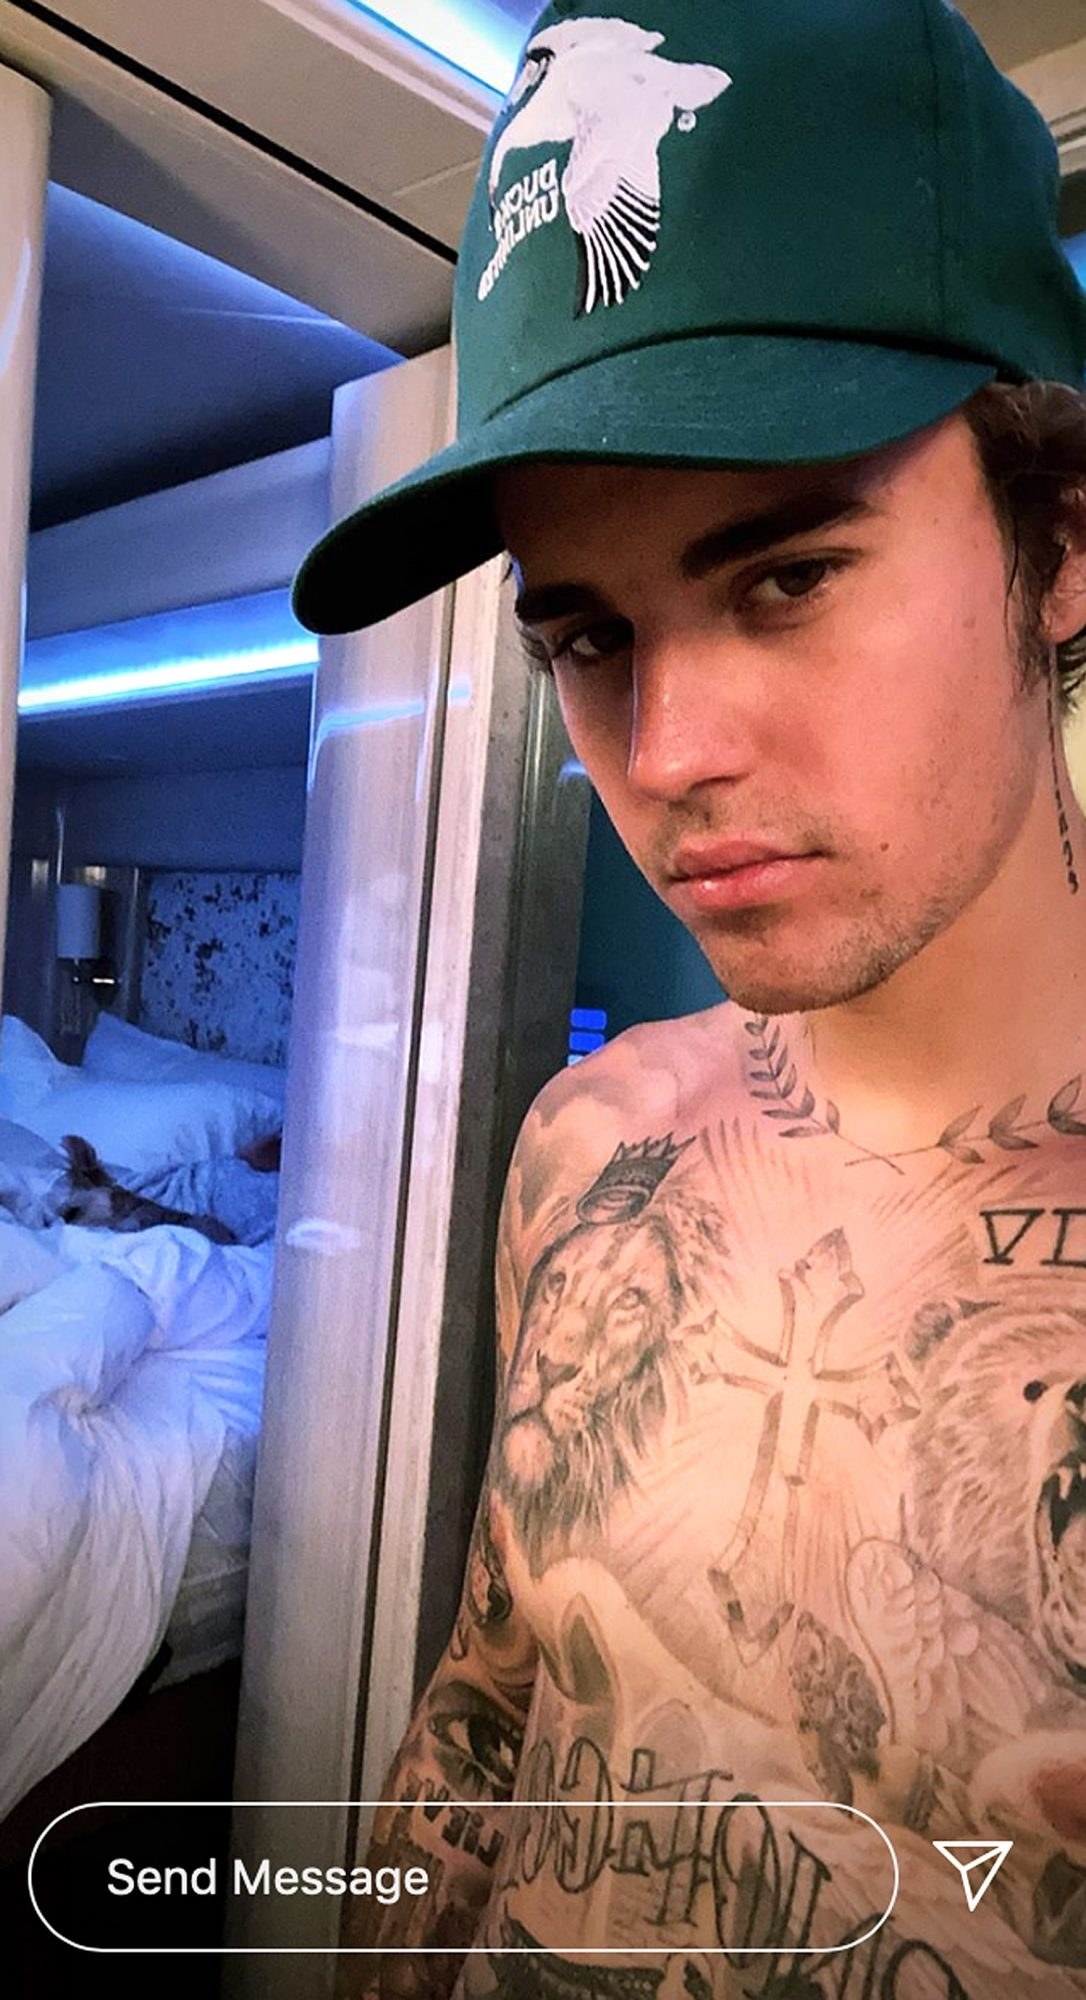 Justin poses for a selfie shirtless